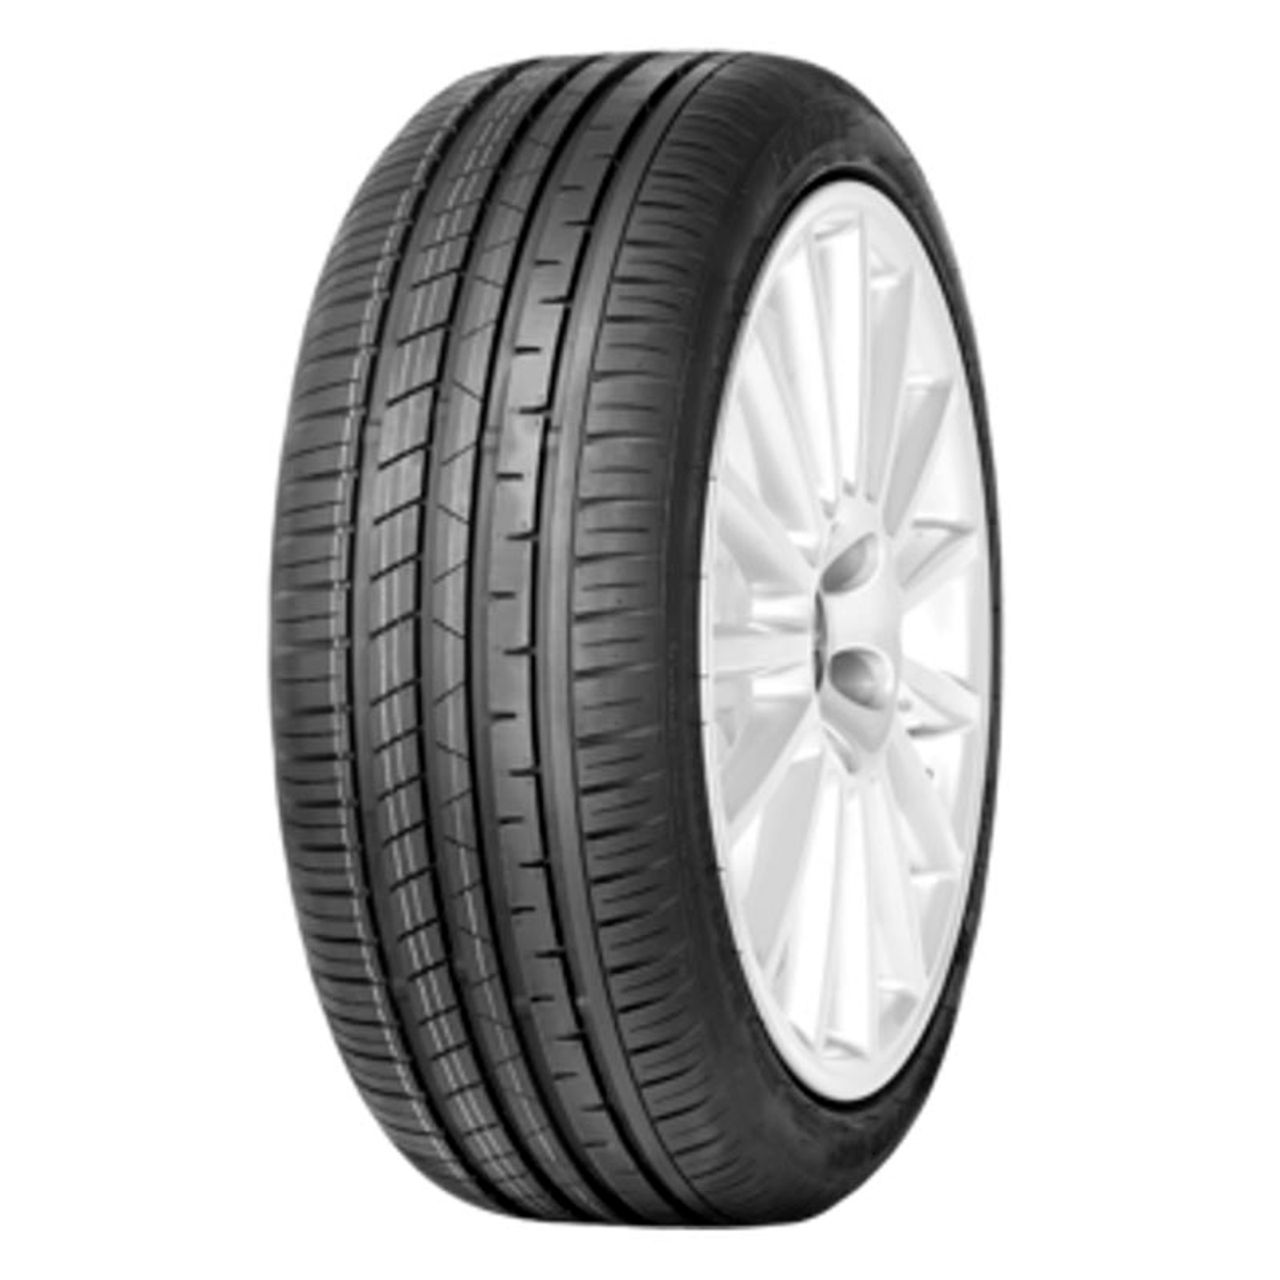 EVENT POTENTEM UHP 225/55R17 101W BSW XL